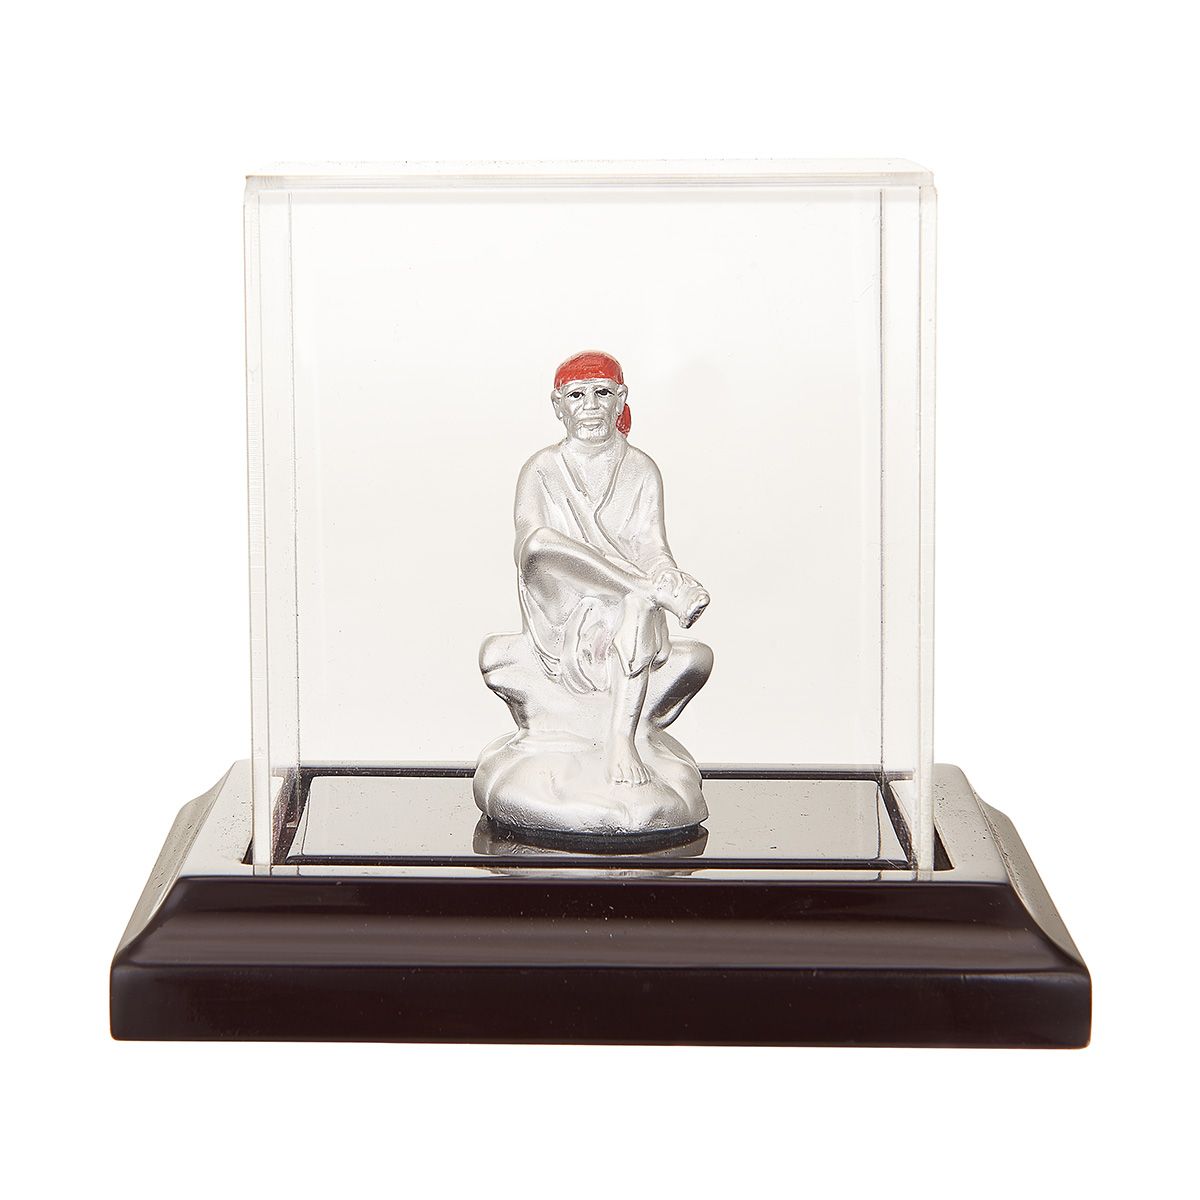 Buy Plan To Gift Sai Baba ji Car Dashboard Idols Figurine Showpiece Online  at Lowest Price Ever in India | Check Reviews & Ratings - Shop The World